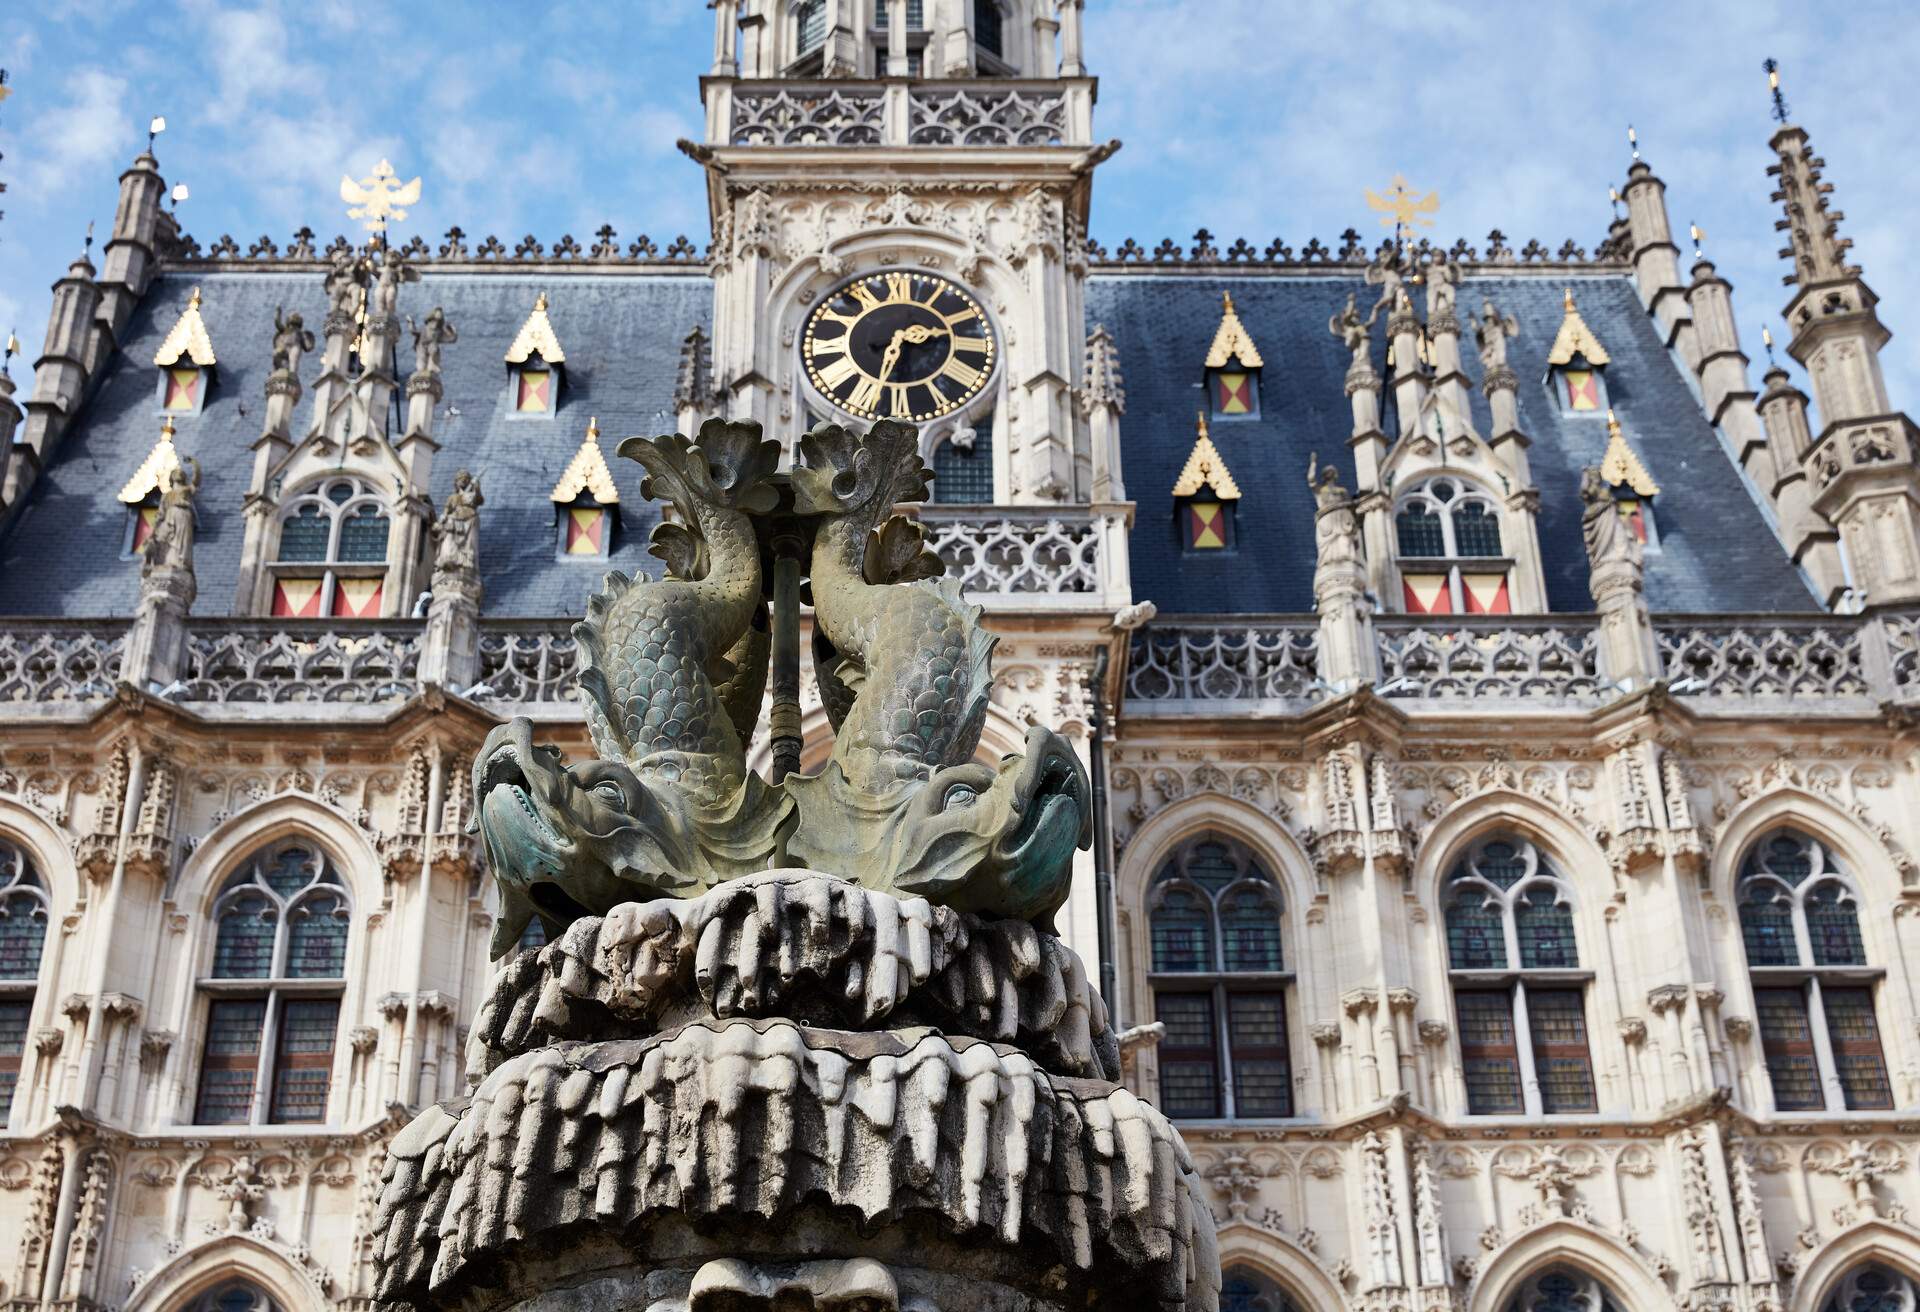 Oudenaarde, Belgium - September 13, 2022. Oudenaarde Town Hall and Belfry. The Town Hall was built in 1526-1537 and is inscribed on the UNESCO World Heritage List. The exterior architecture is secular Brabantine Gothic. Royal fountain in foreground.